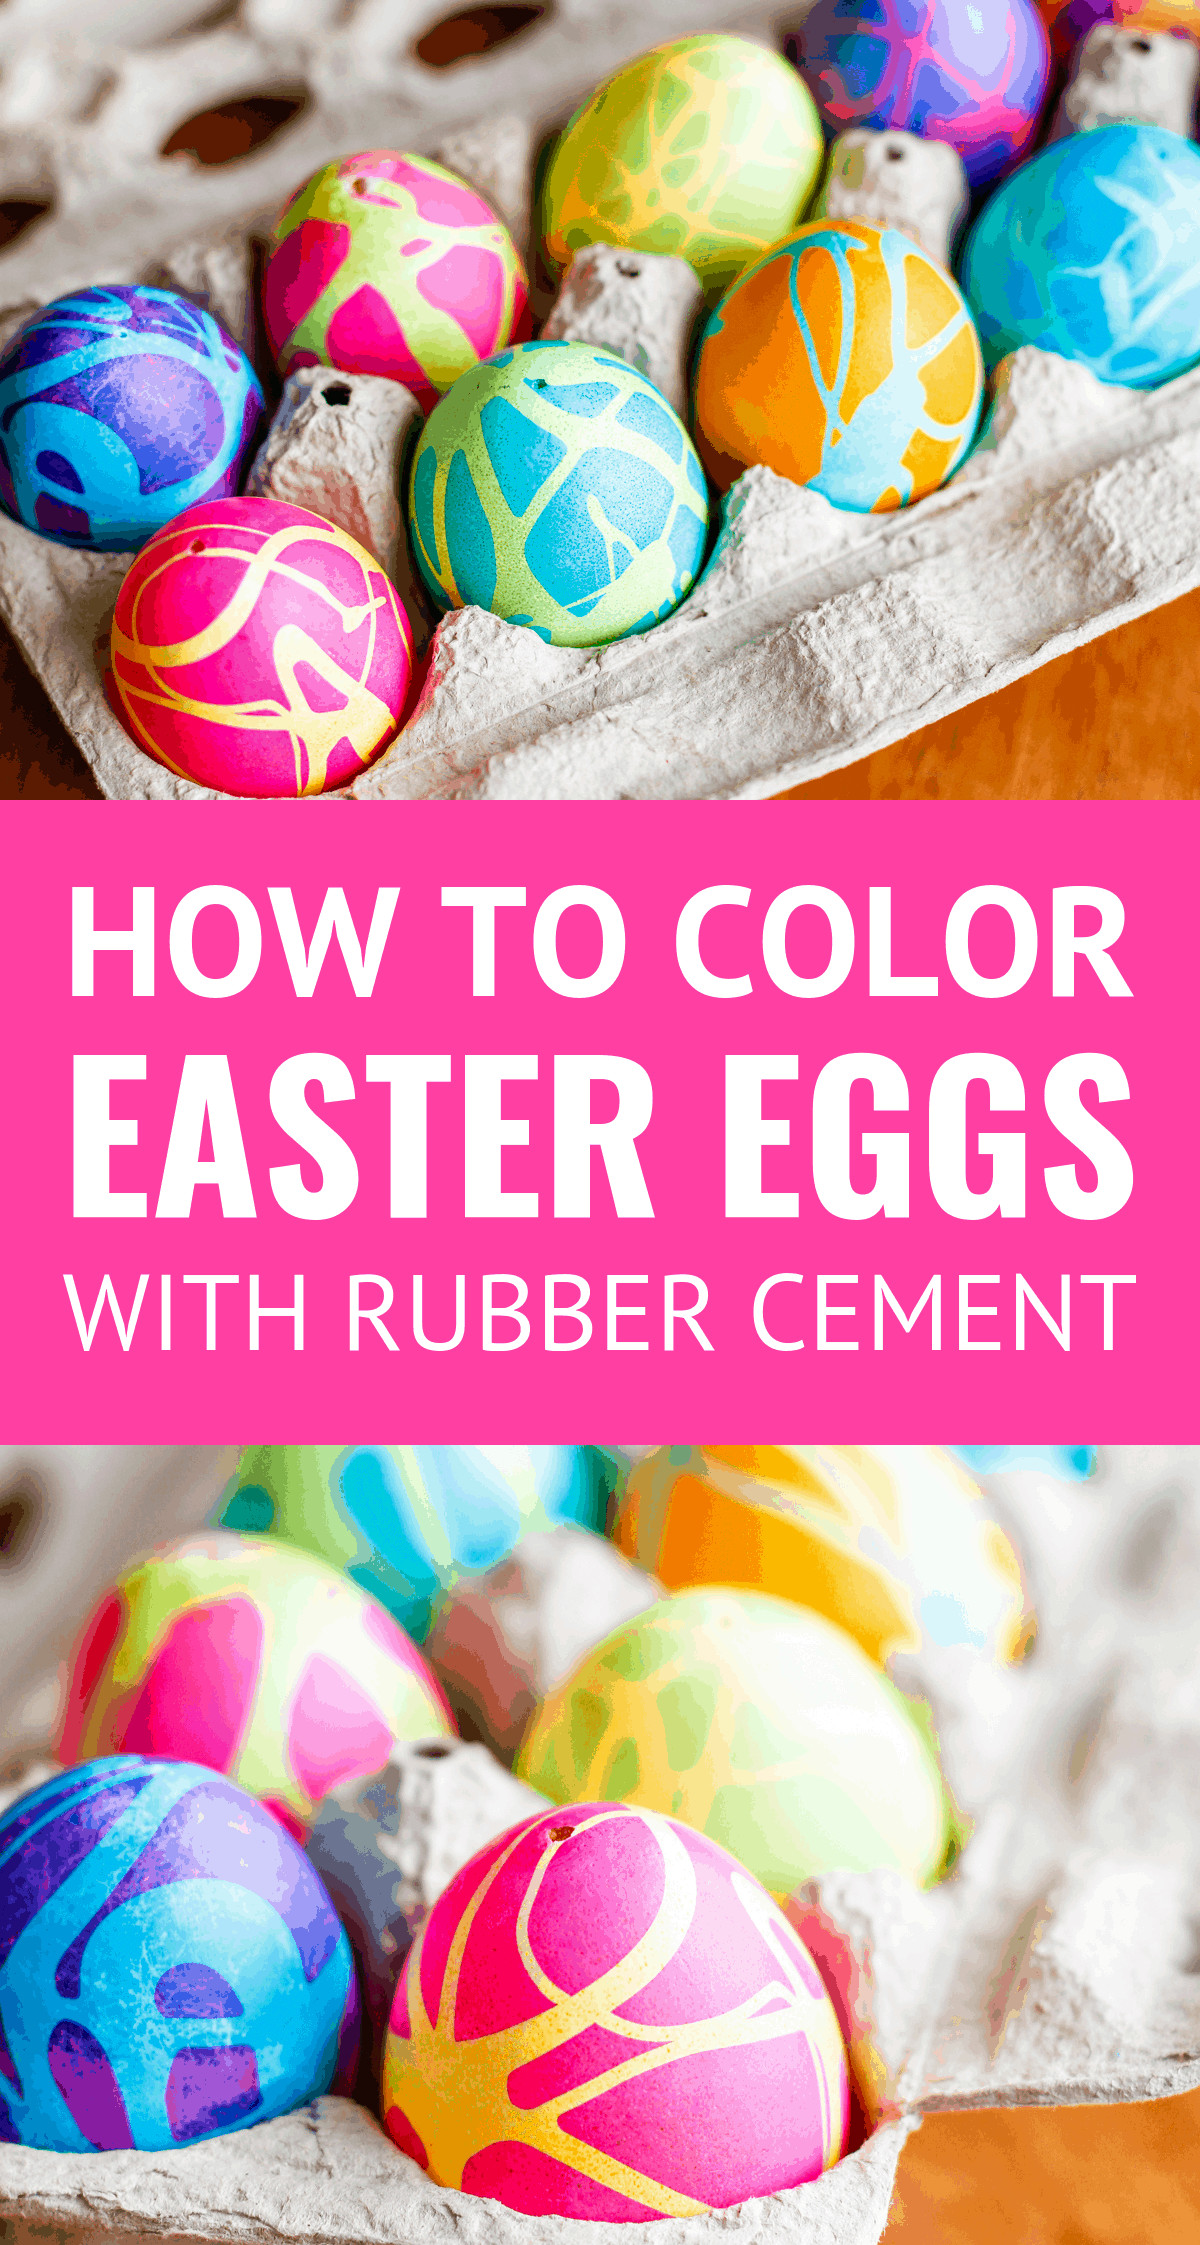 Easter Eggs With Food Coloring
 Coloring Easter Eggs w Rubber Cement & Food Coloring